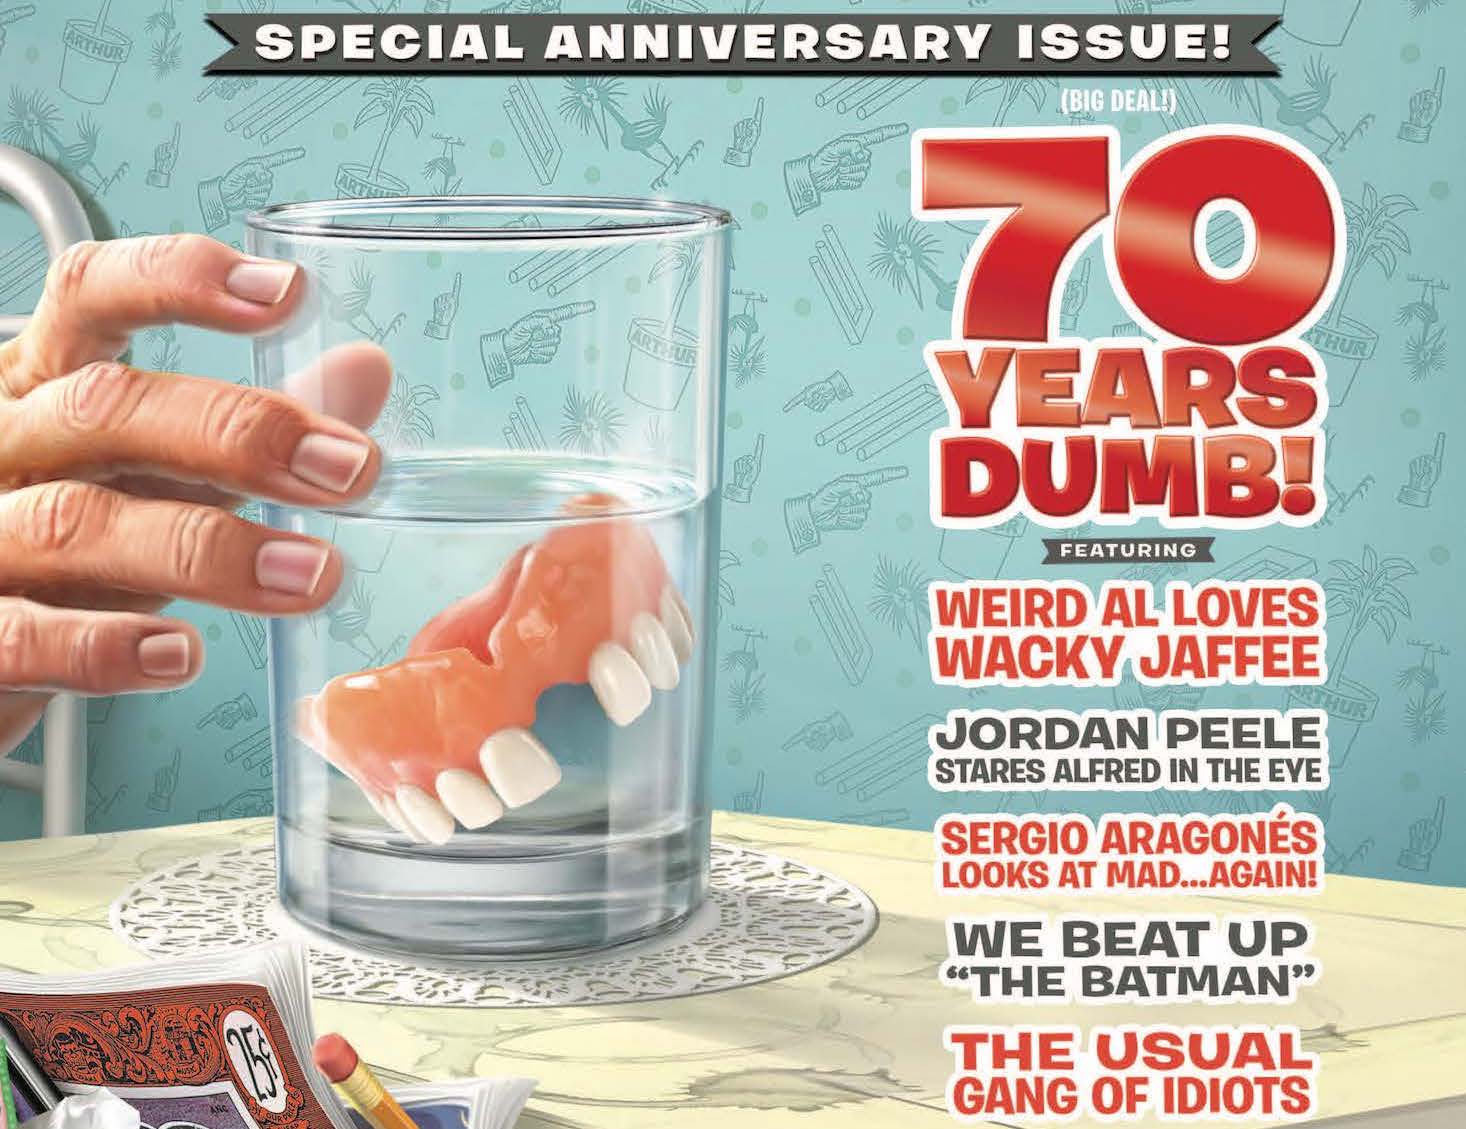 MAD Magazine celebrates 70th Anniversary with new content by Jordan Peele, Weird Al, and more